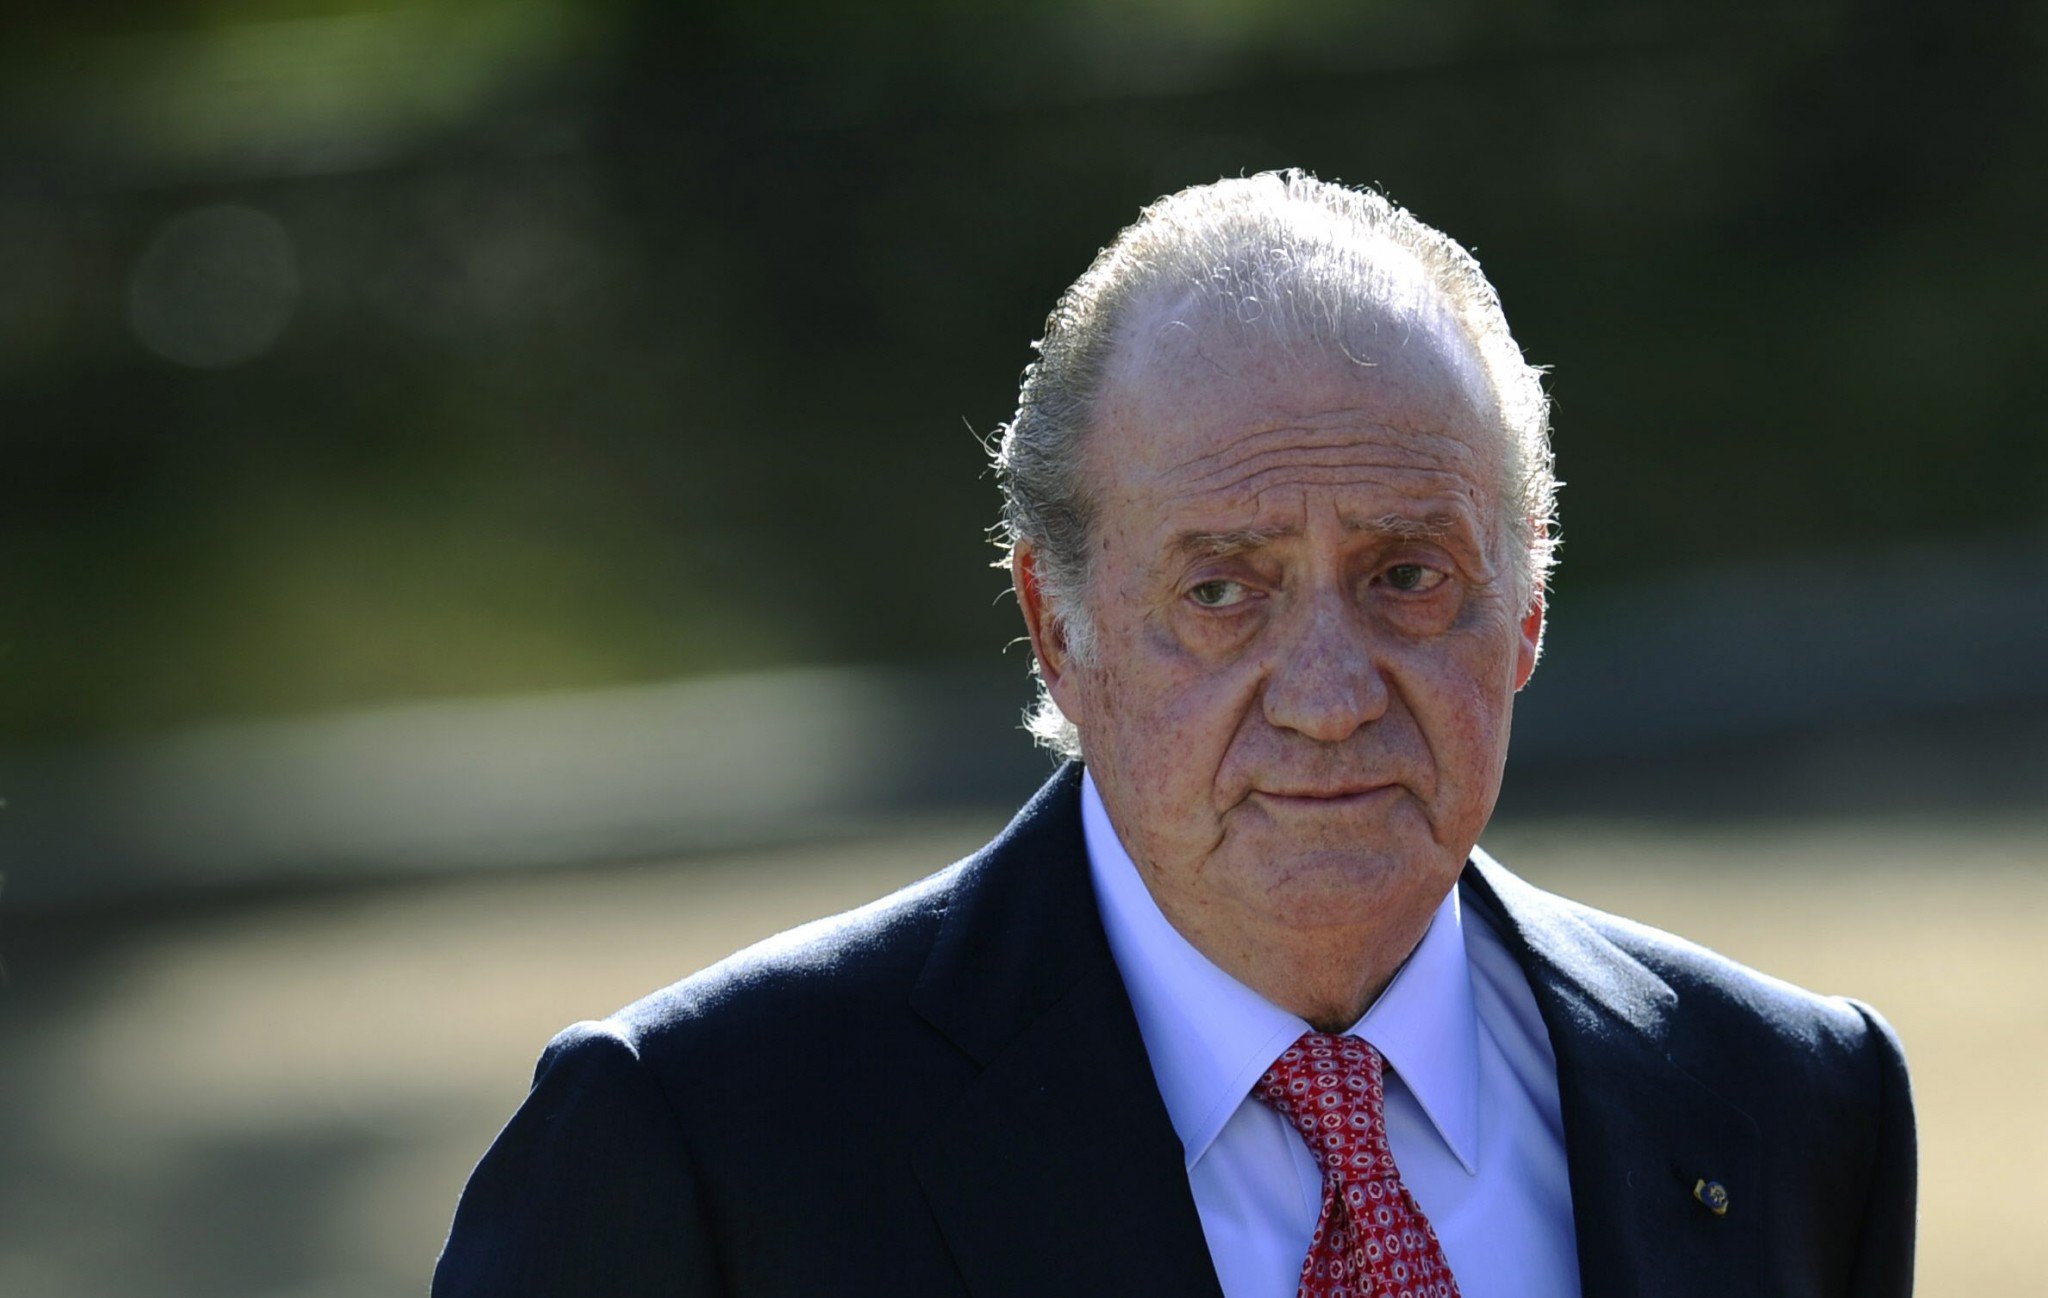 Spanish judge José Castro: "Juan Carlos will die without paying his debt to justice"